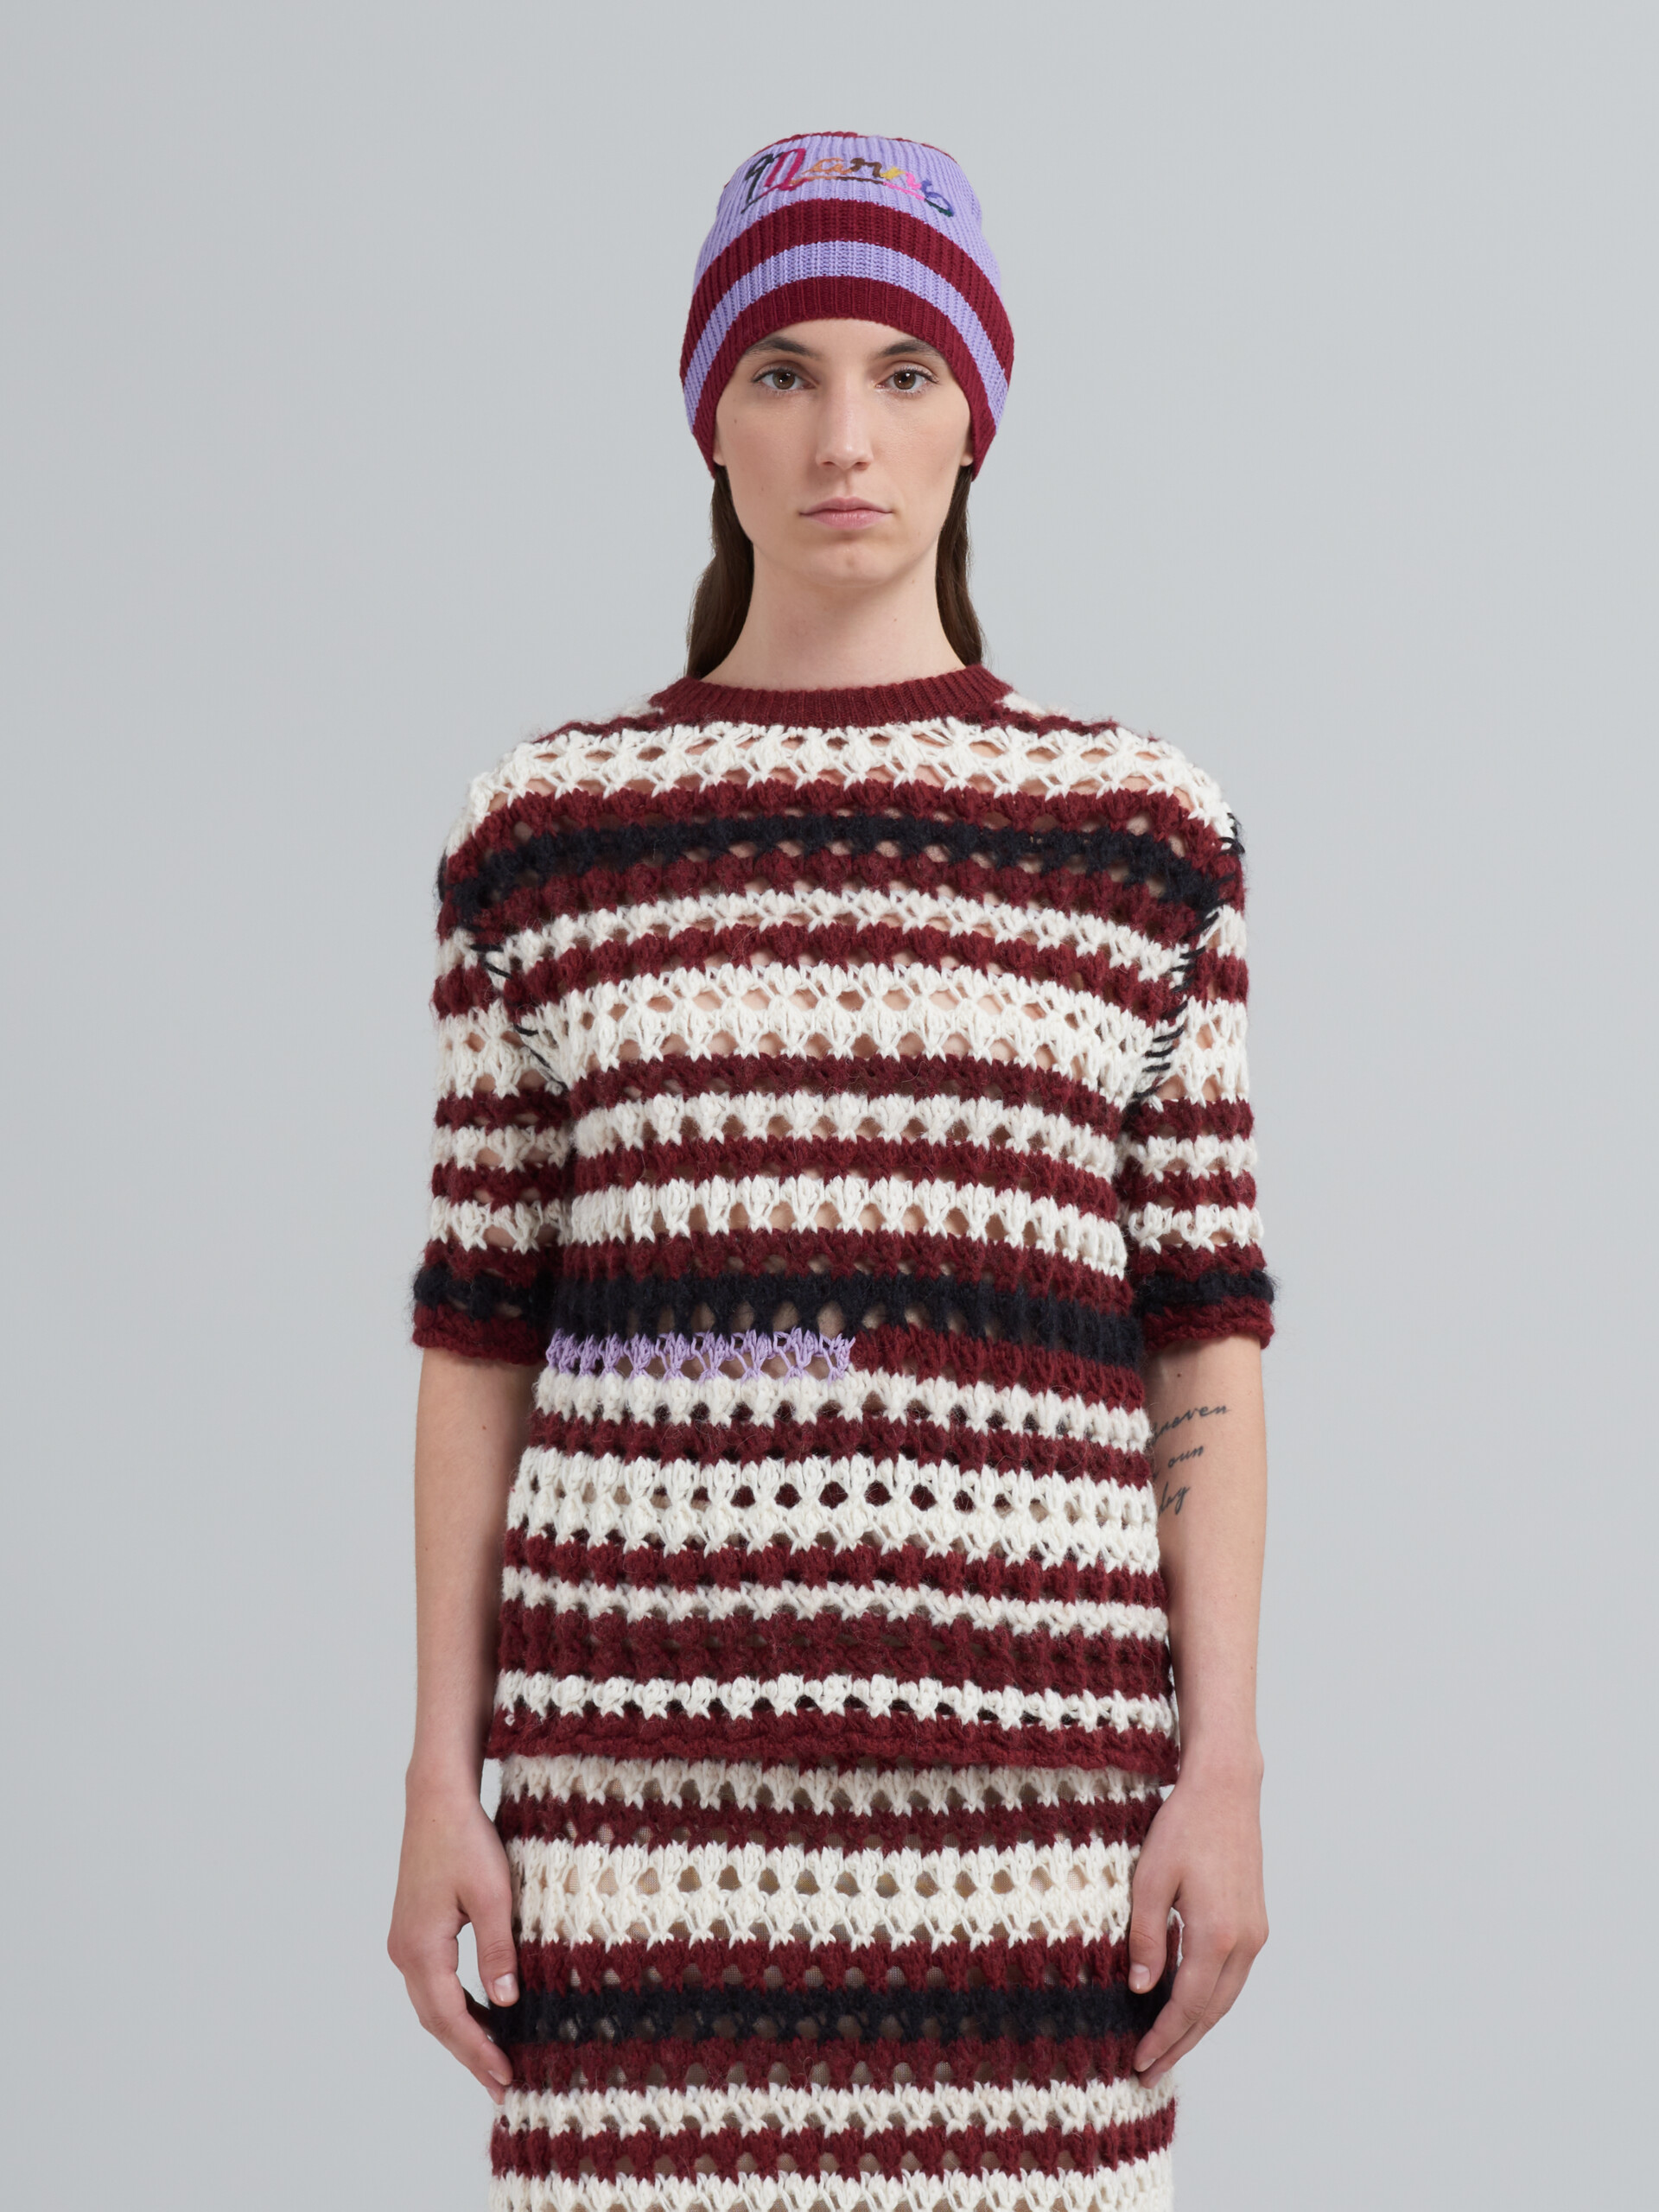 Multi-coloured striped 3D crochet intarsia sweater in blended yarns - Pullovers - Image 2